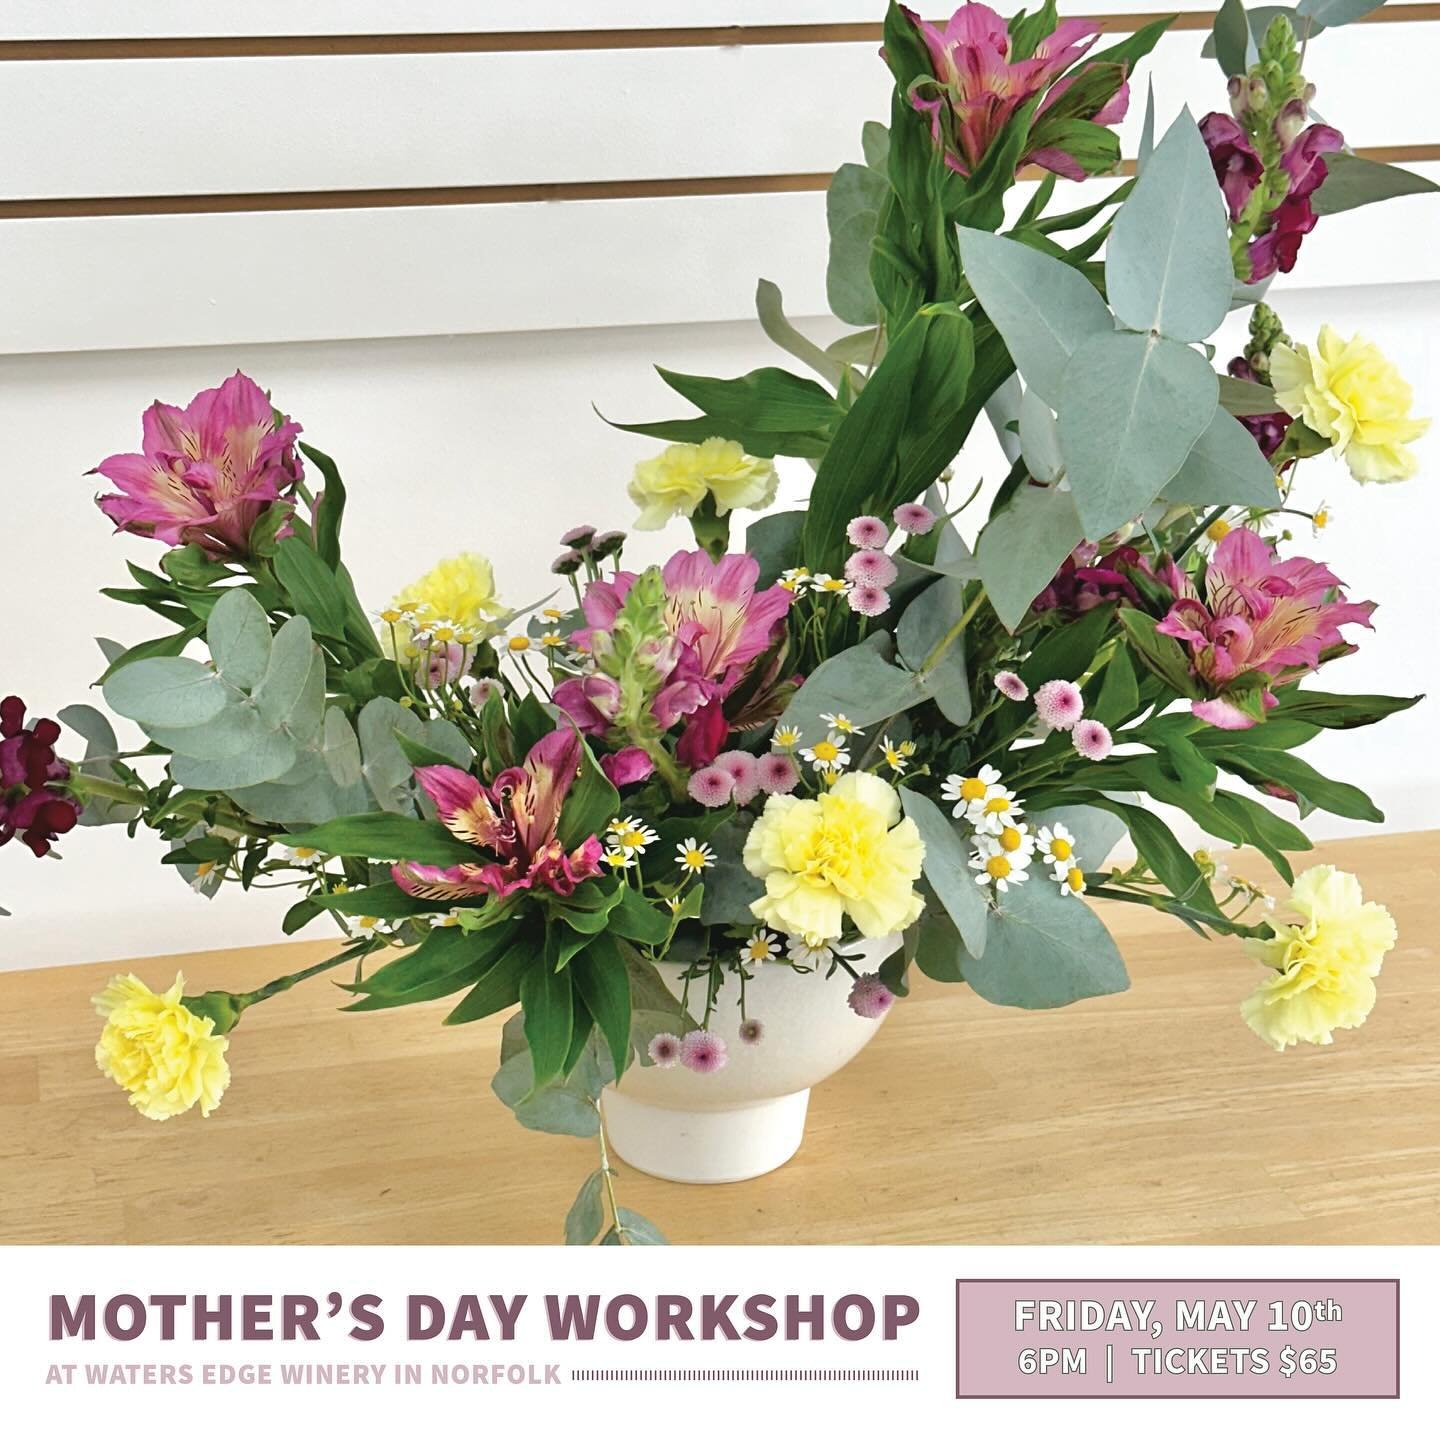 👋🏻 Join us Friday, May 10th at Waters Edge Winery in Norfolk as we design something extra special for the one, the only&hellip;mom!

We&rsquo;ll use a sleek modern white ceramic compote (from our new product line!) with floral foam to house a chic 